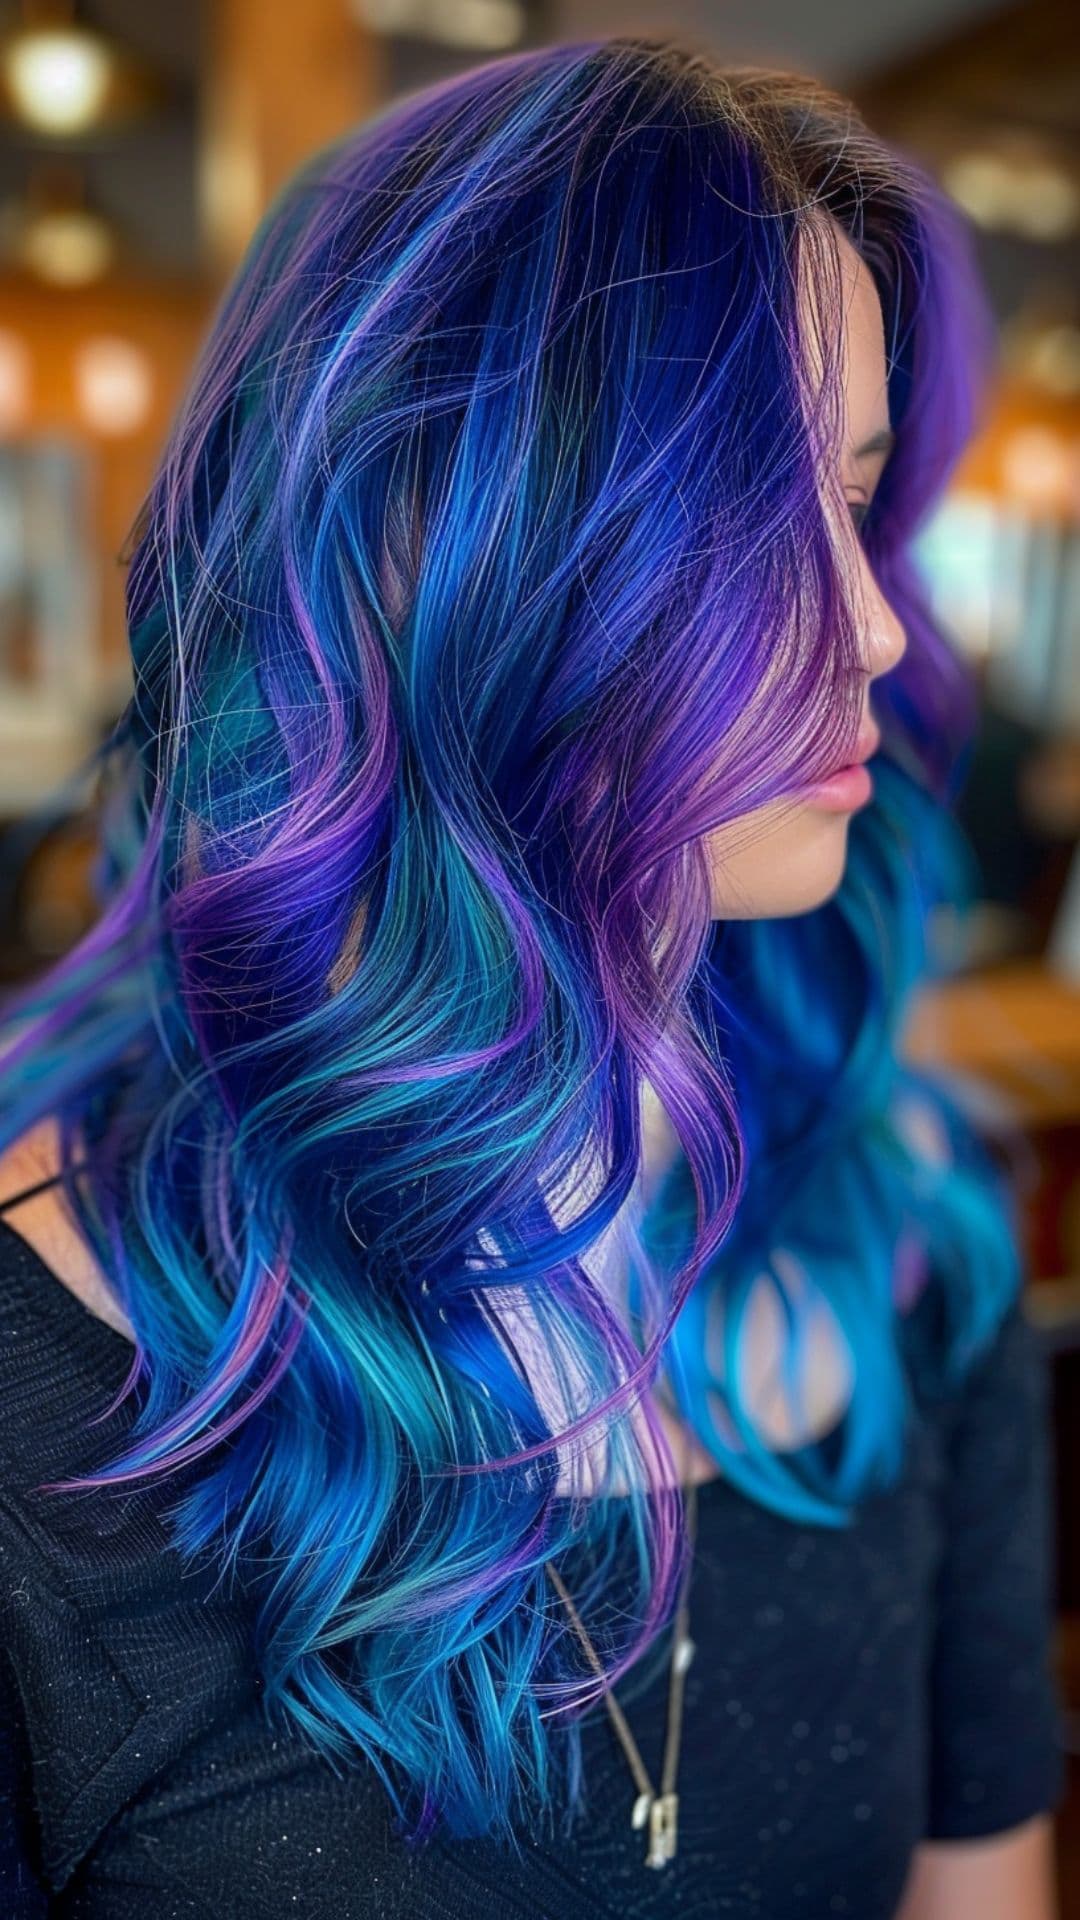 A woman modelling a galaxy inspired hair color.